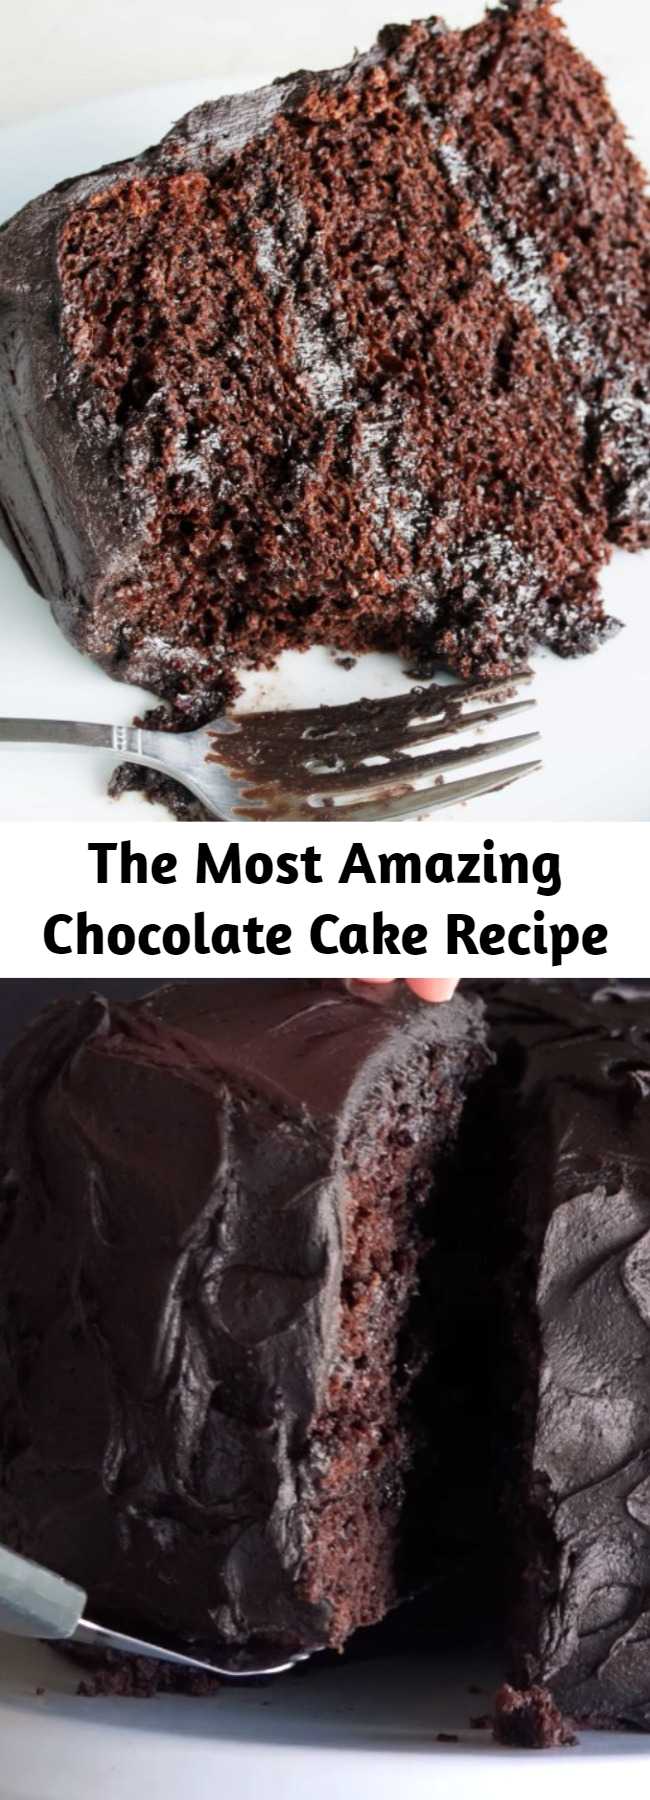 The Most Amazing Chocolate Cake Recipe - The Most Amazing Chocolate Cake is here. You won’t find a better chocolate cake recipe than this one. You will be amazed at how good it is, and you will amaze those that you make if for. Moist, chocolatey perfection. This is the chocolate cake you've been dreaming of. #chocolatecake #cakerecipes